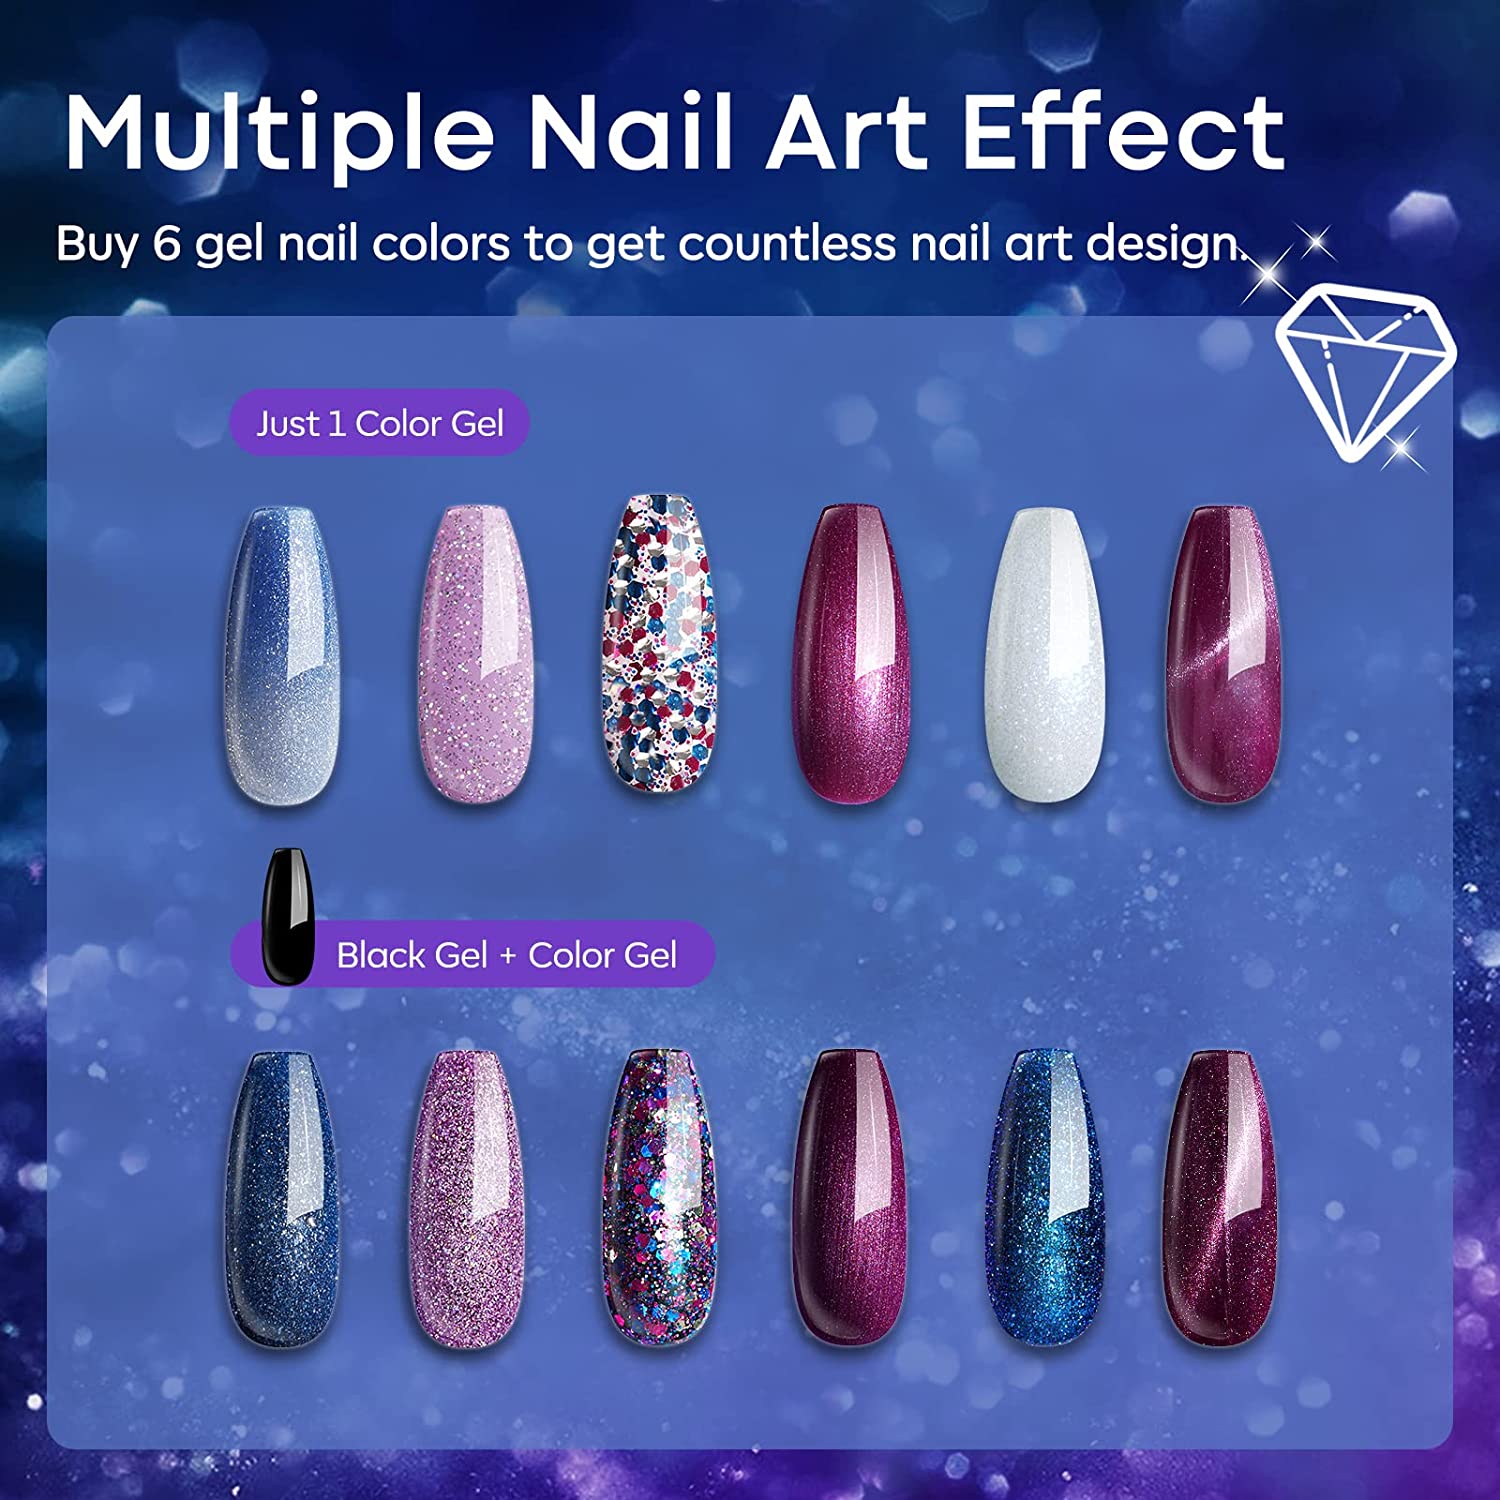 Milky Way - 6 Shades Inspire Gel Set 7ml【US ONLY】